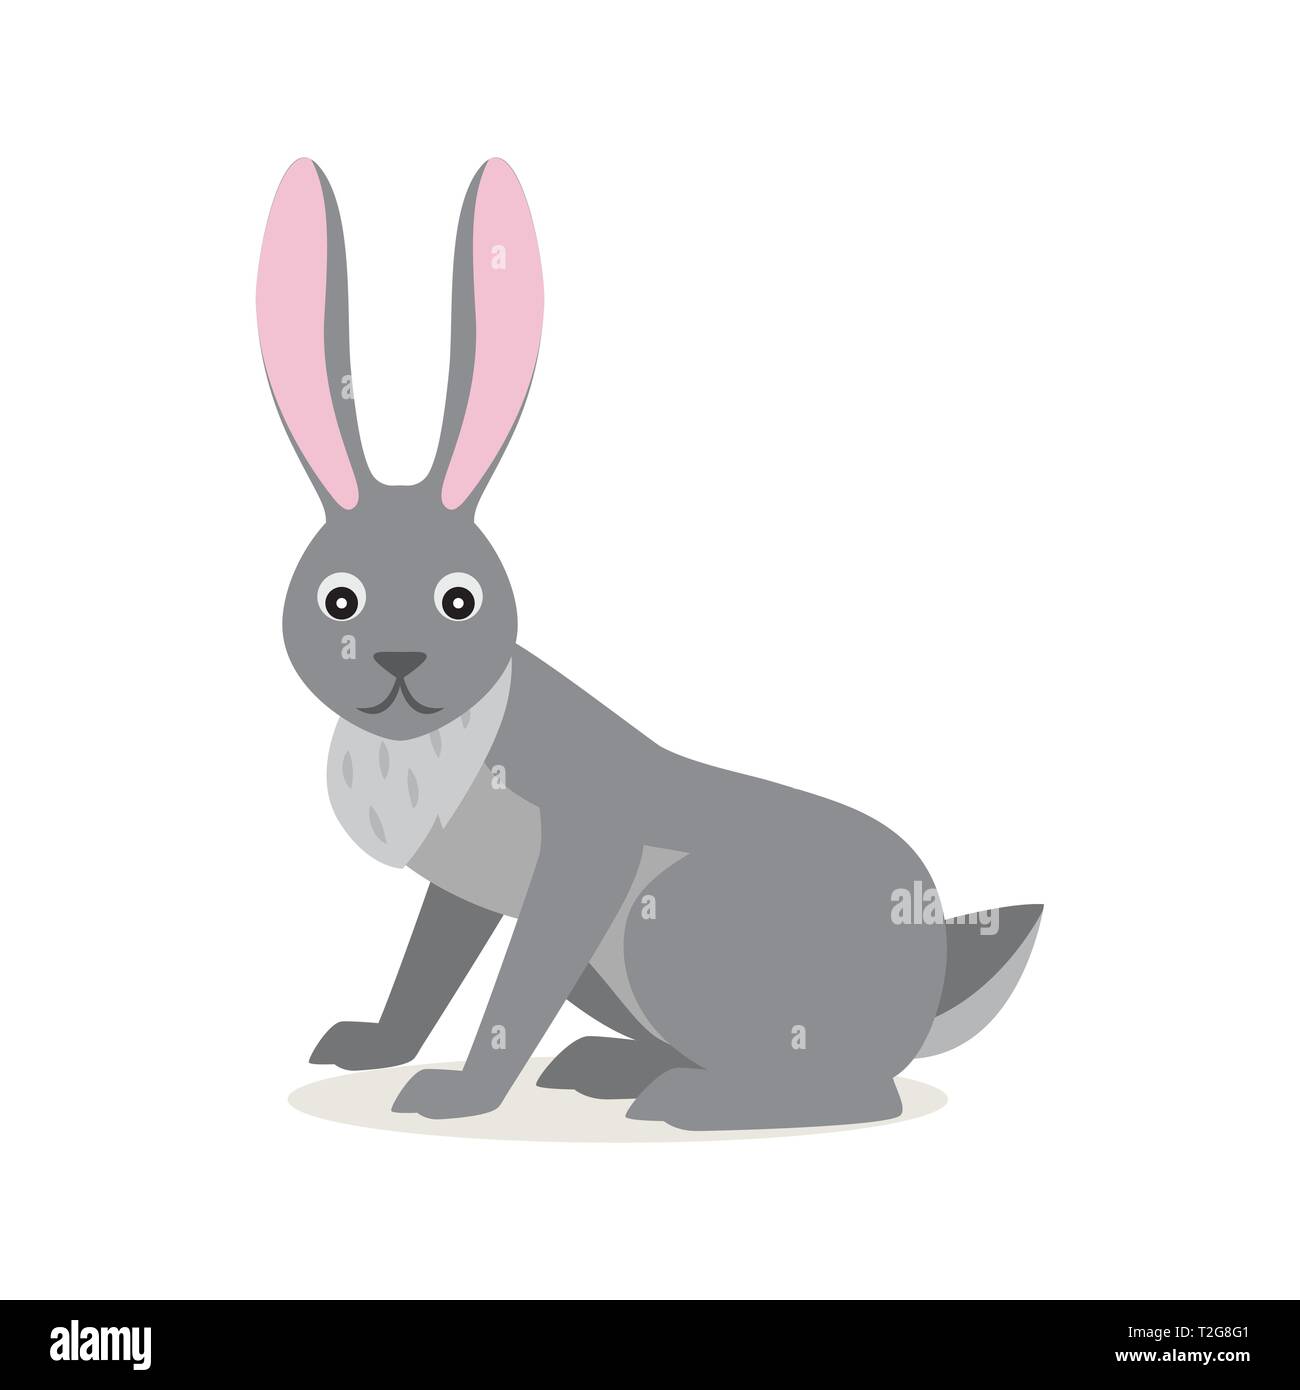 Cute gray rabbit hare isolated on white background, scared emotion, forest, woodland animal, vector illustration in flat style Stock Vector